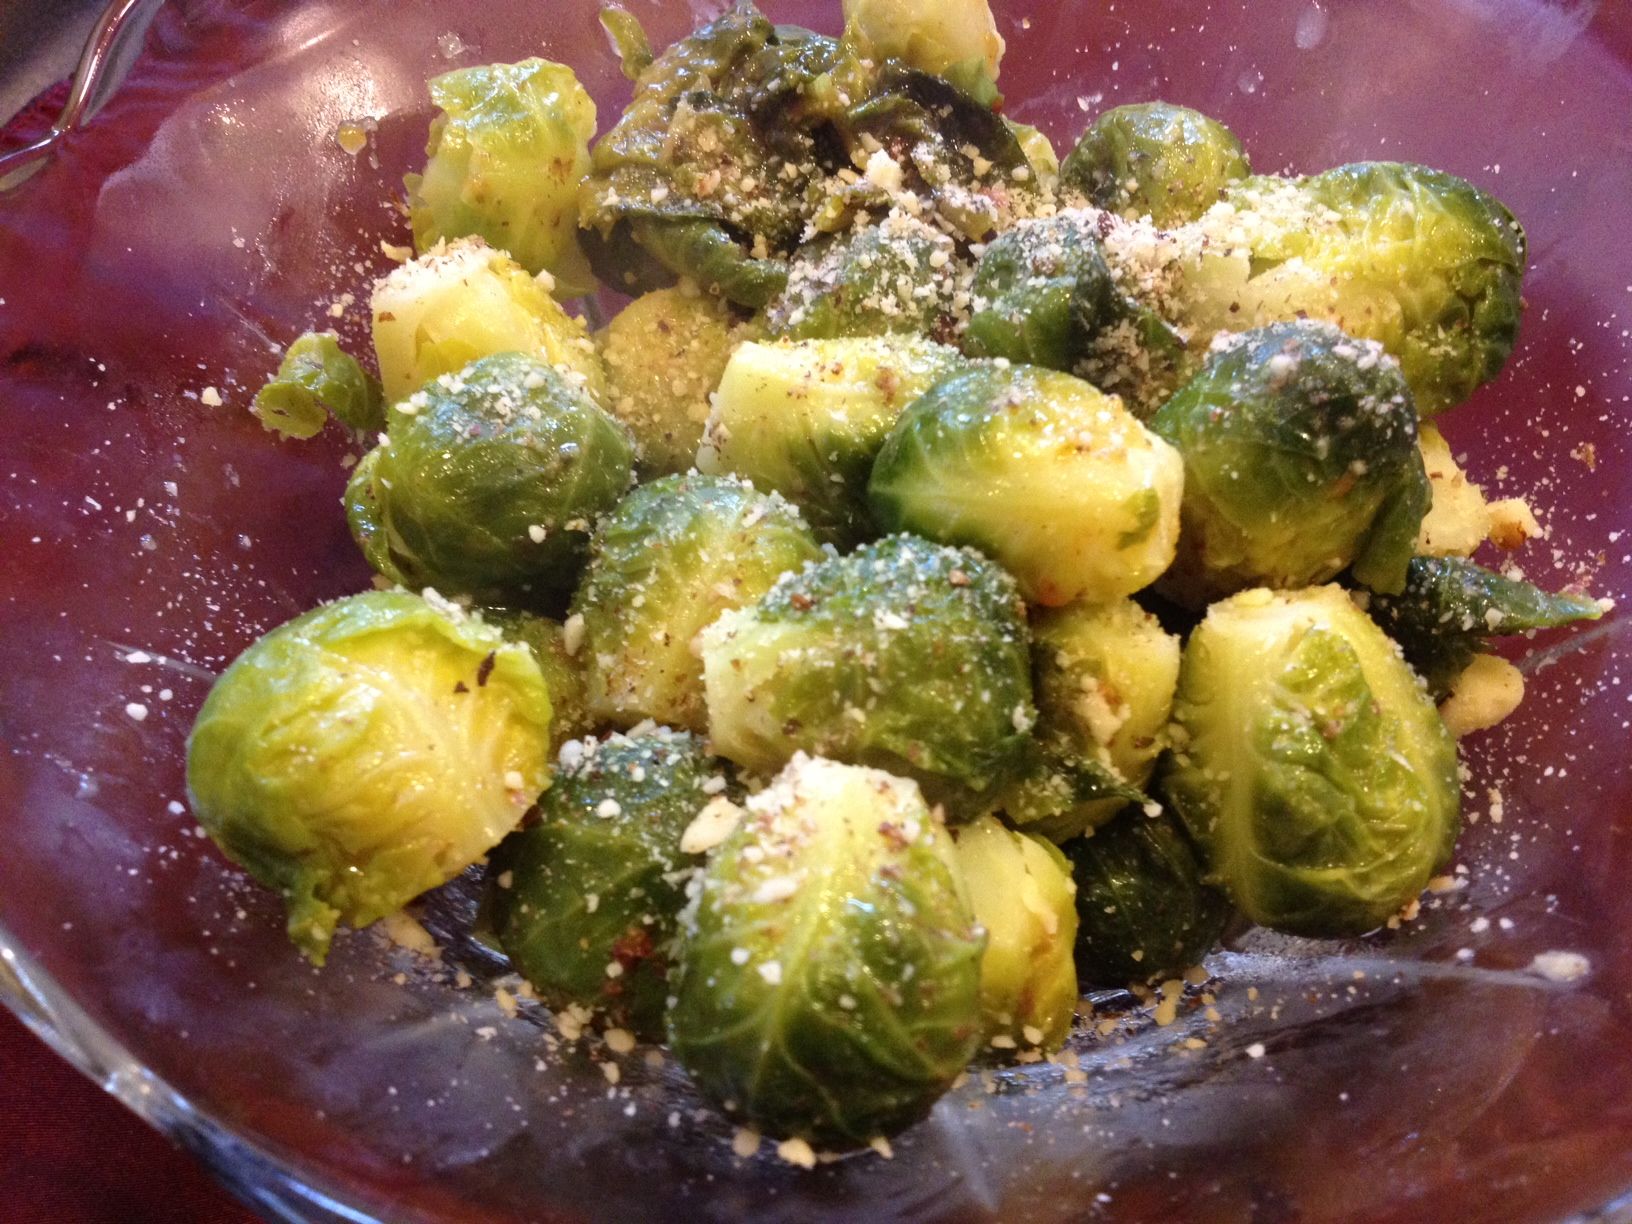 Brussels Sprouts with Nuts